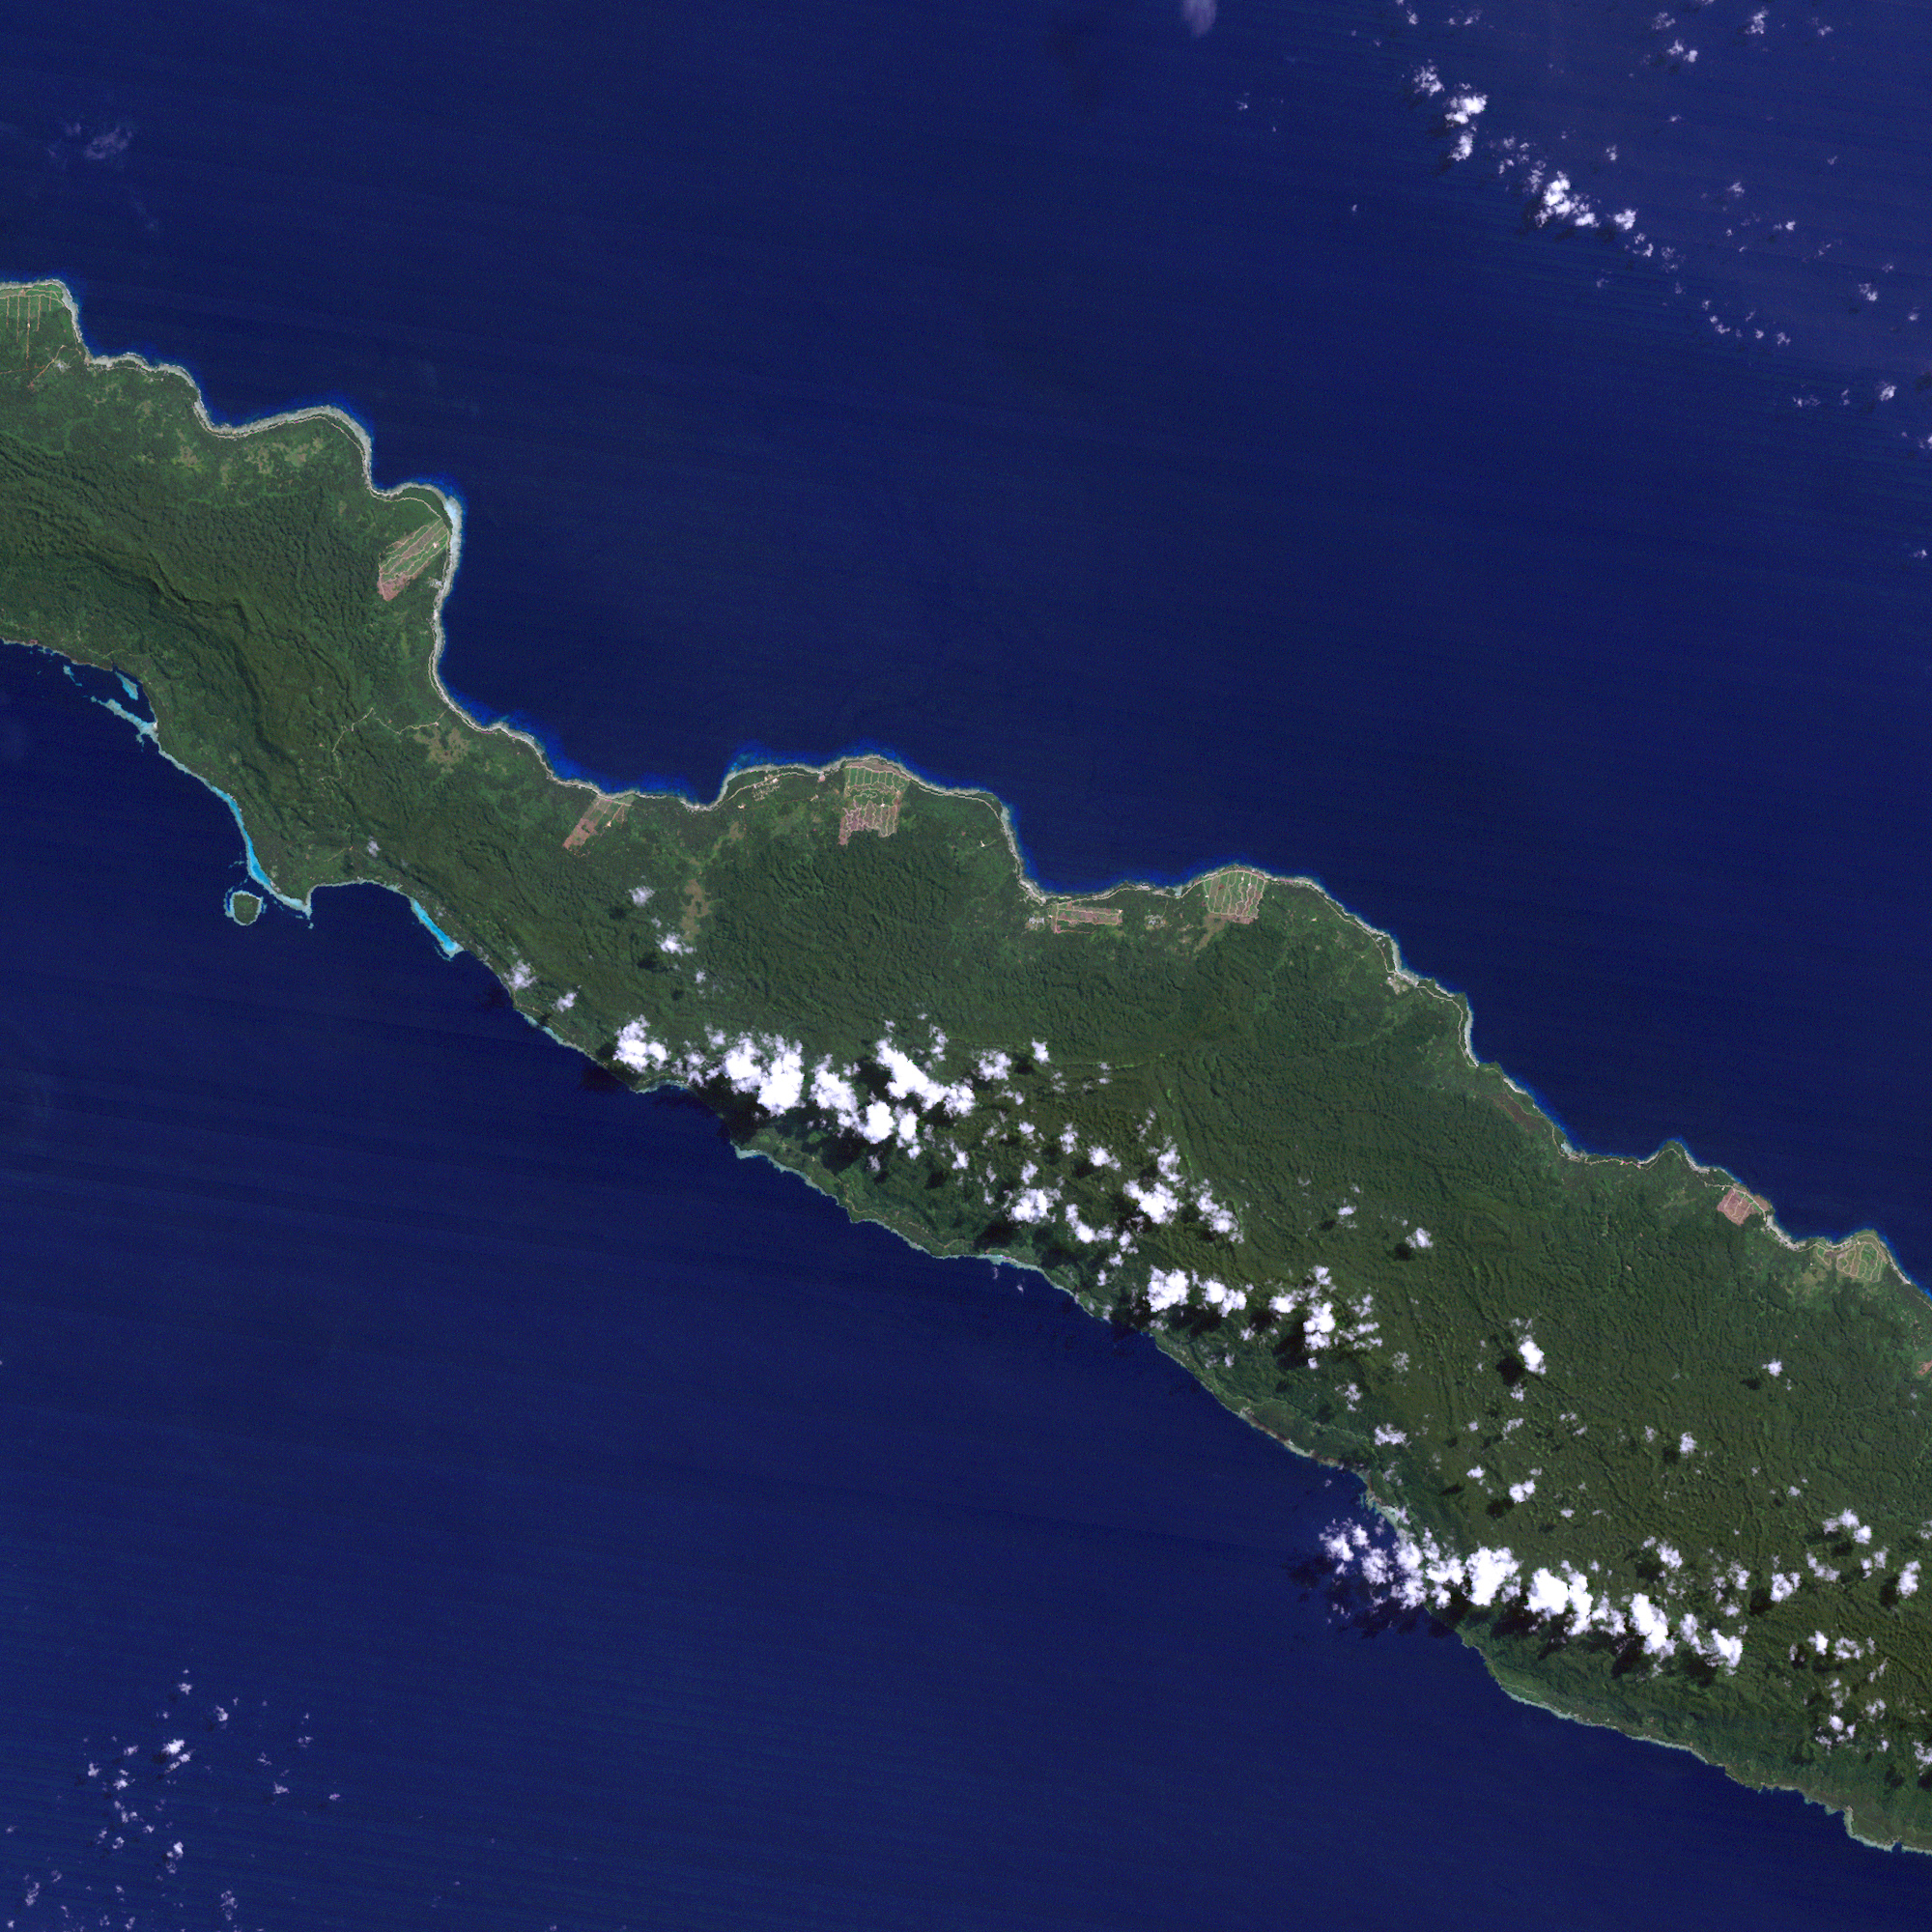 Forest Change on New Ireland, Papua New Guinea - related image preview